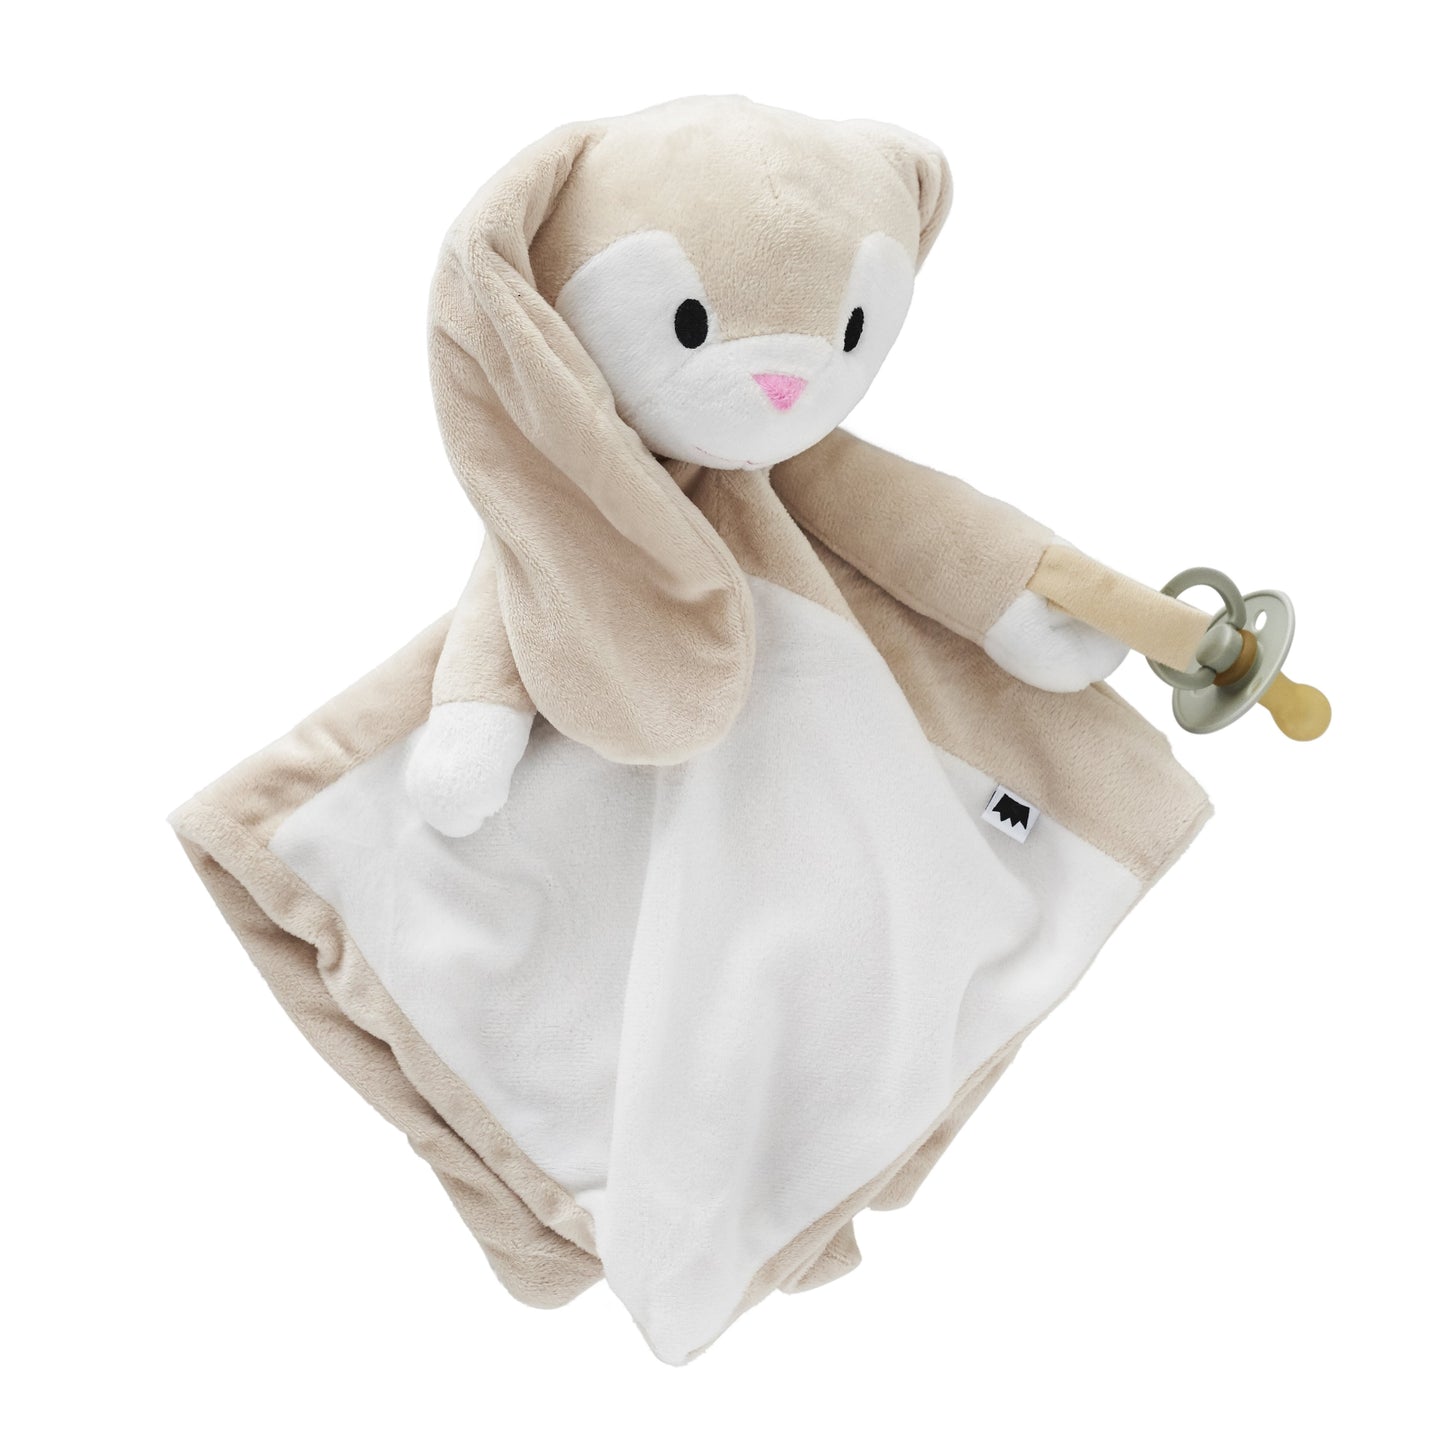 Wash Day Spare Plush - Clover The Bunny (no soundbox included) Riff Raff & Co Sleep Toys 